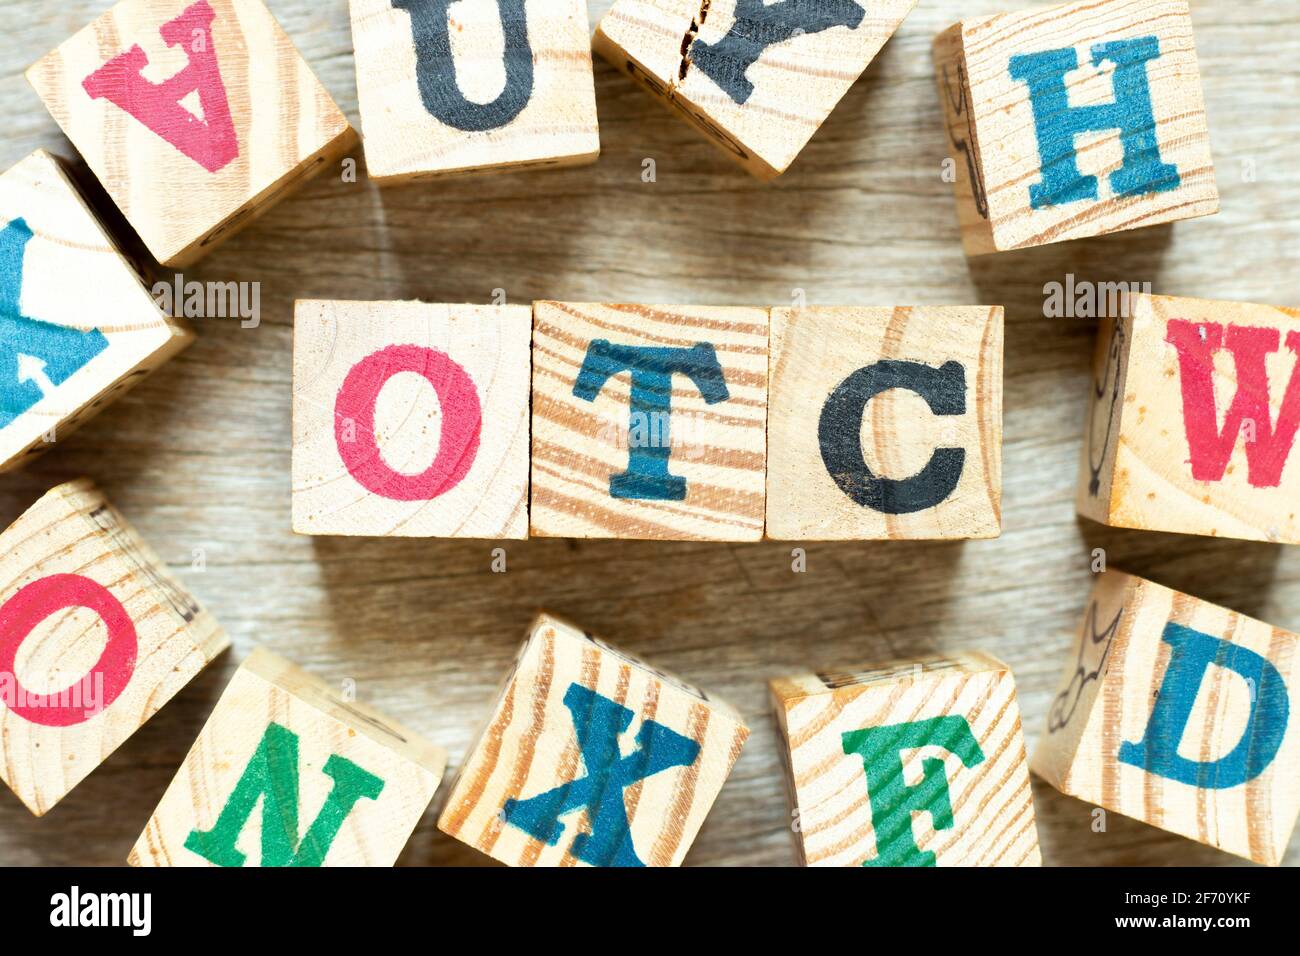 Alphabet letter block in word OTC (Abbreviation of over the counter) with another on wood background Stock Photo